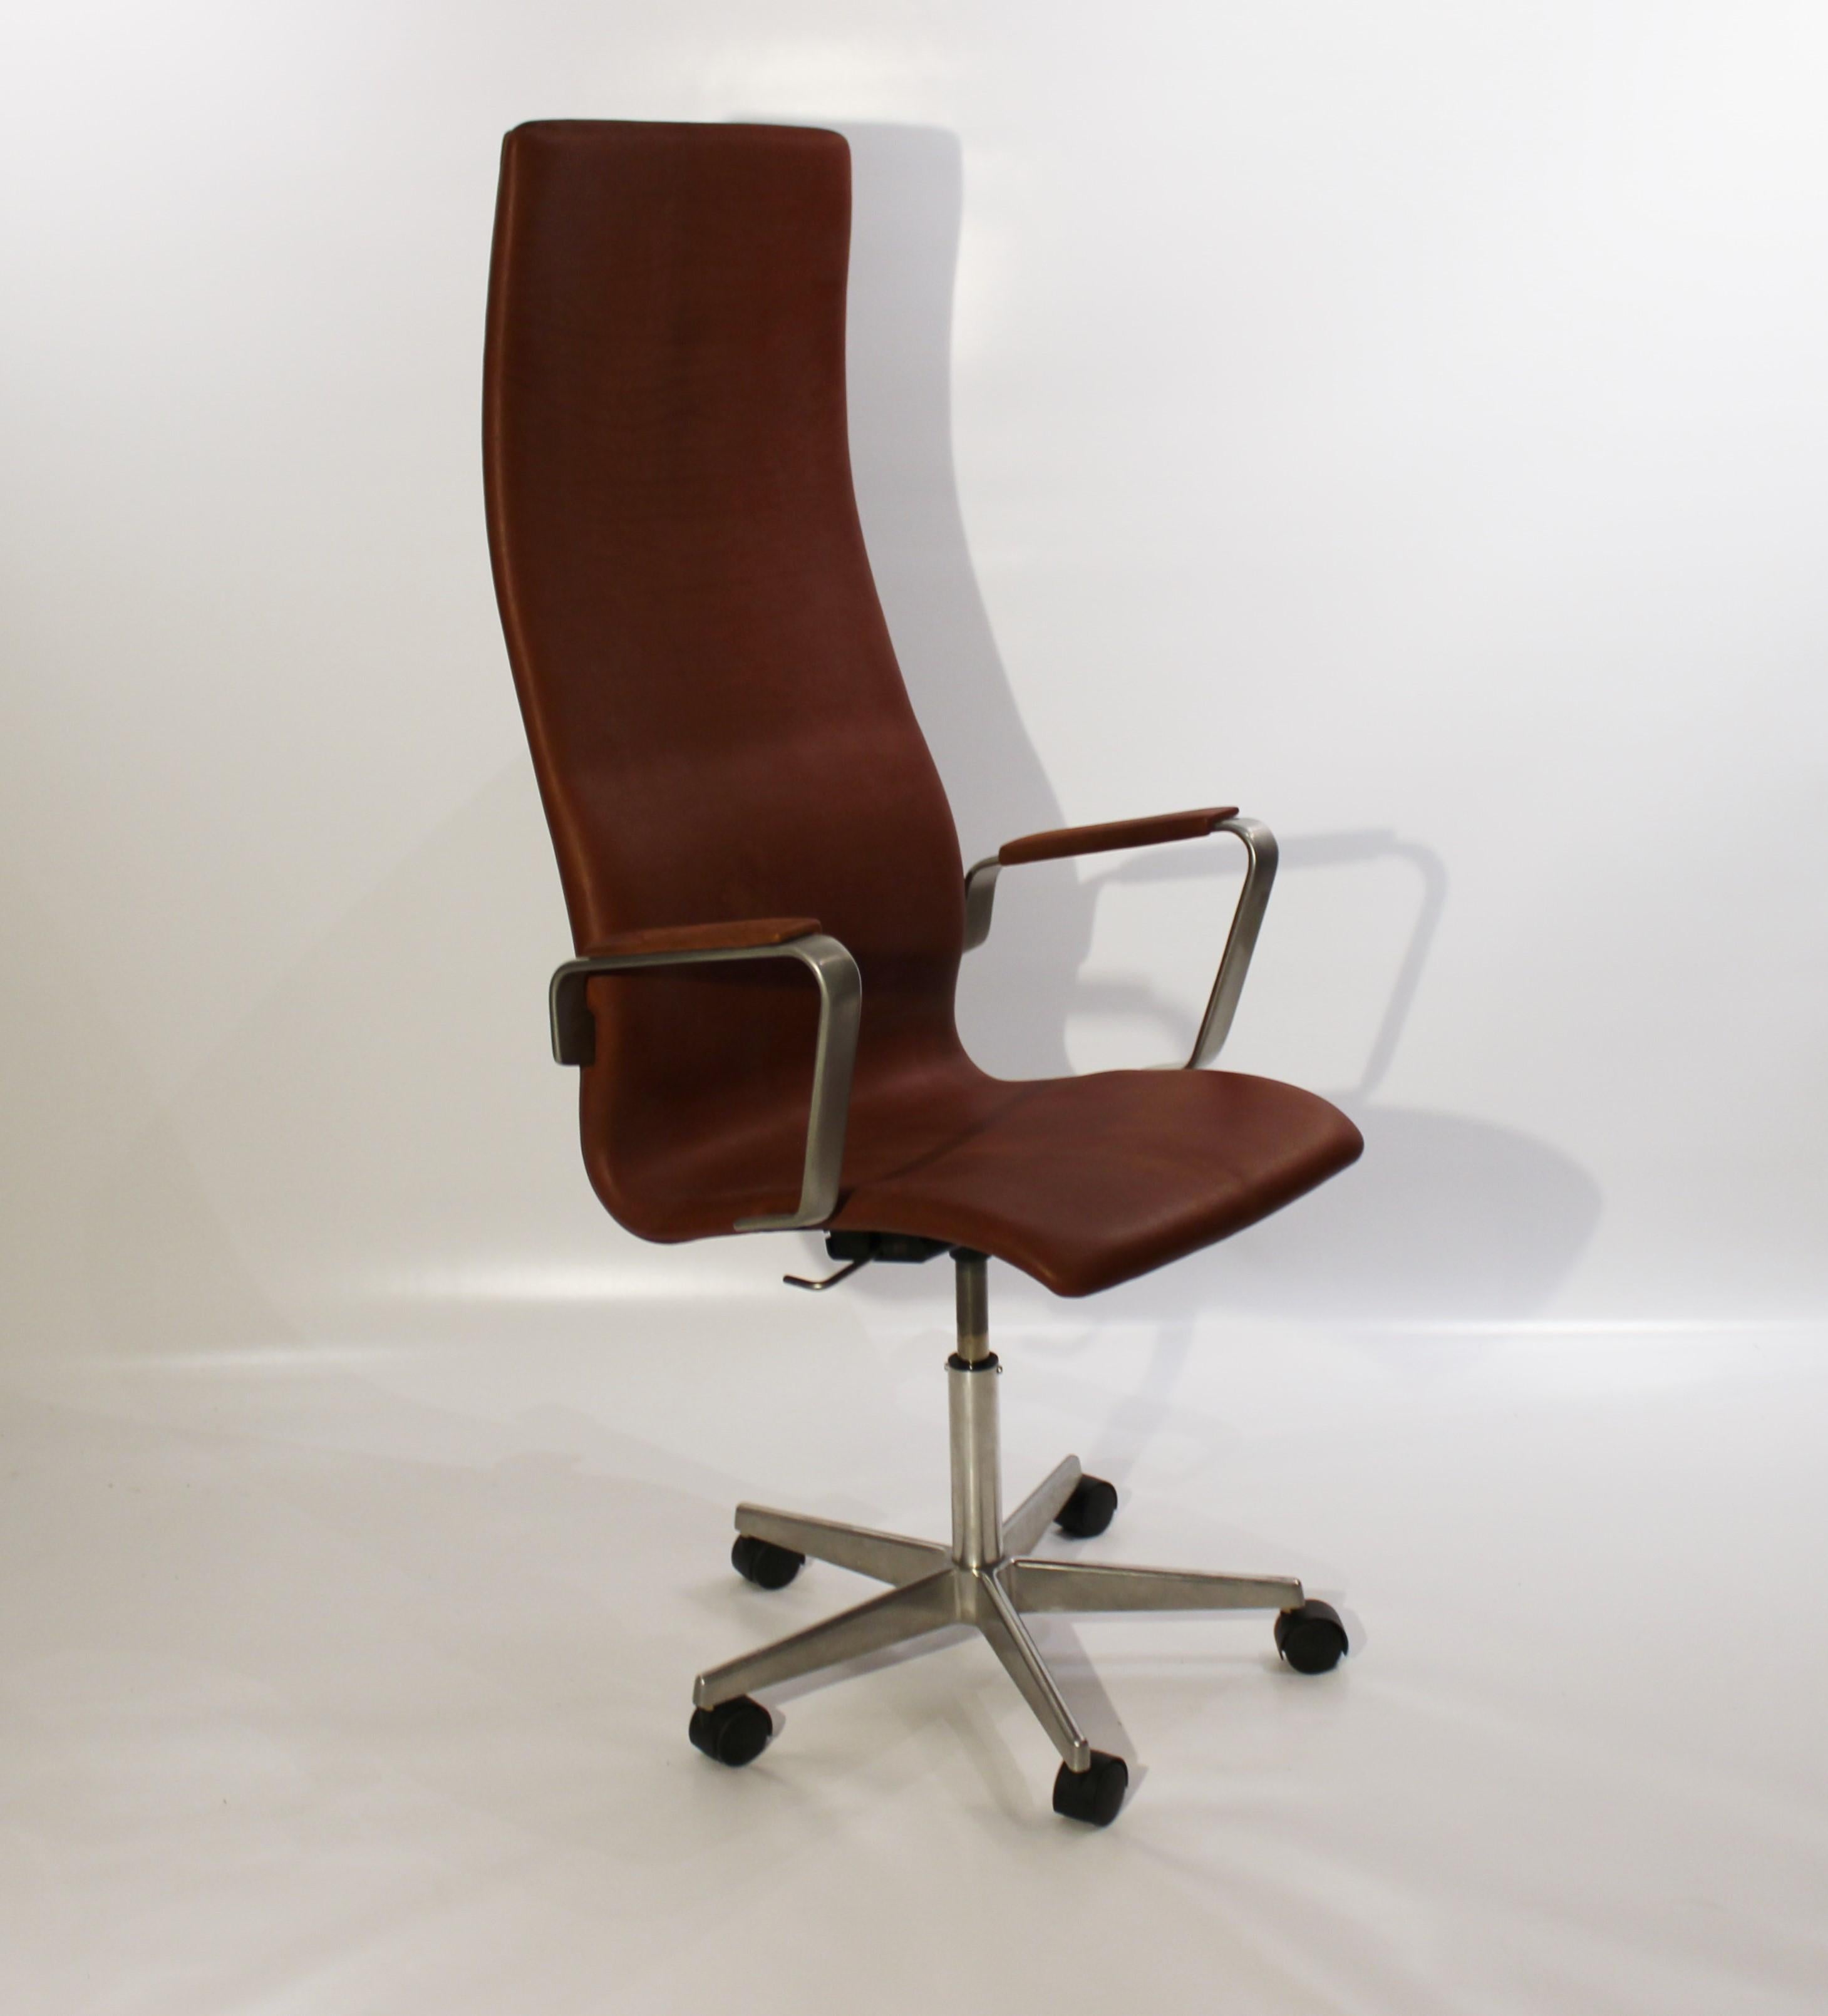 The Oxford classic office chair, model 3292C, in patinated elegance leather. Designed by Arne Jacobsen in 1963 and manufactured by Fritz Hansen in the 1960s. The chair is in great vintage condition and newly upholstered.